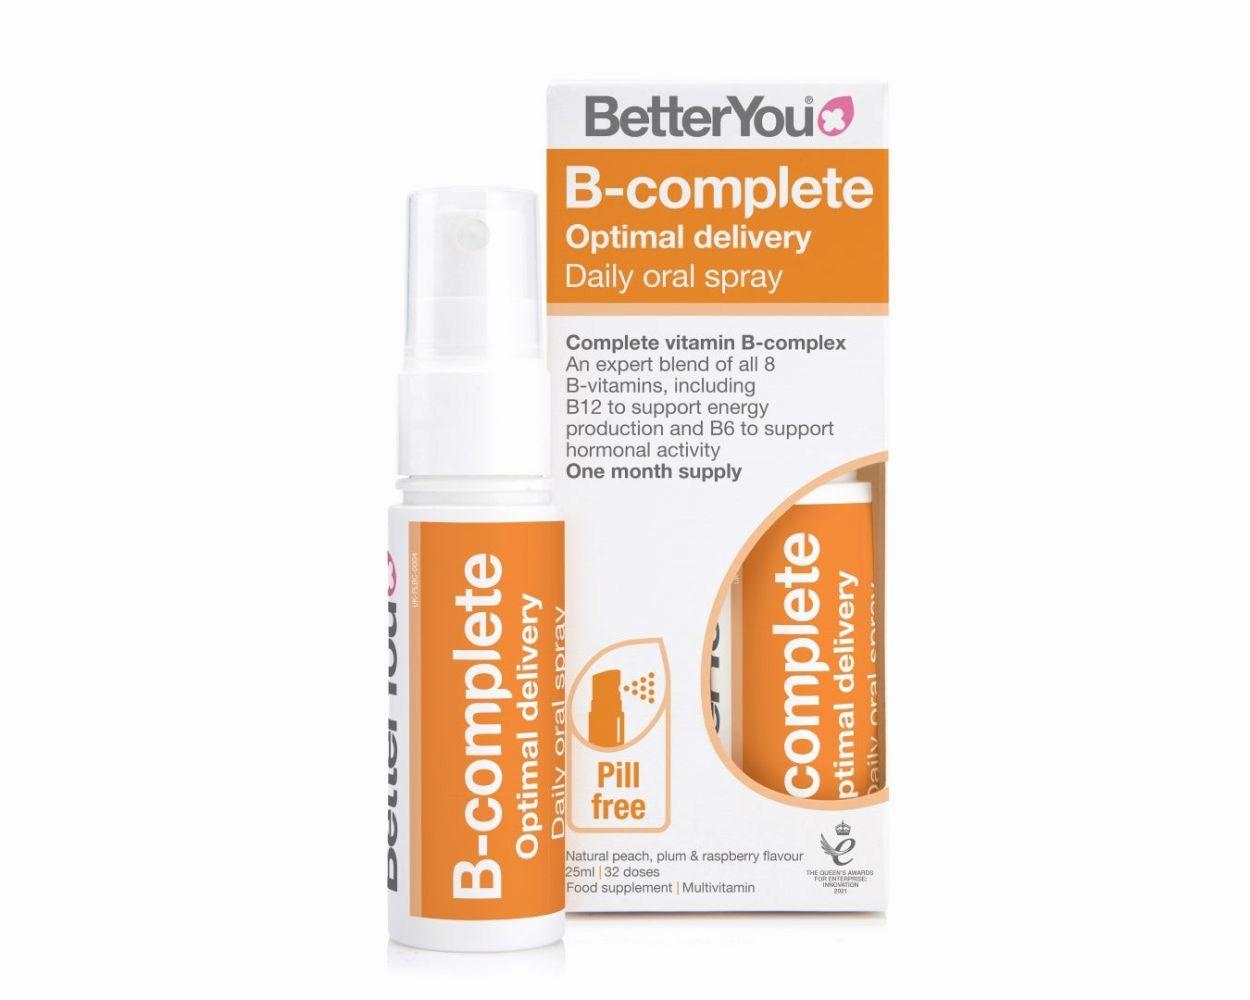 A box of BetterYou B-Complete, a daily oral spray that provides a complete vitamin B-complex.